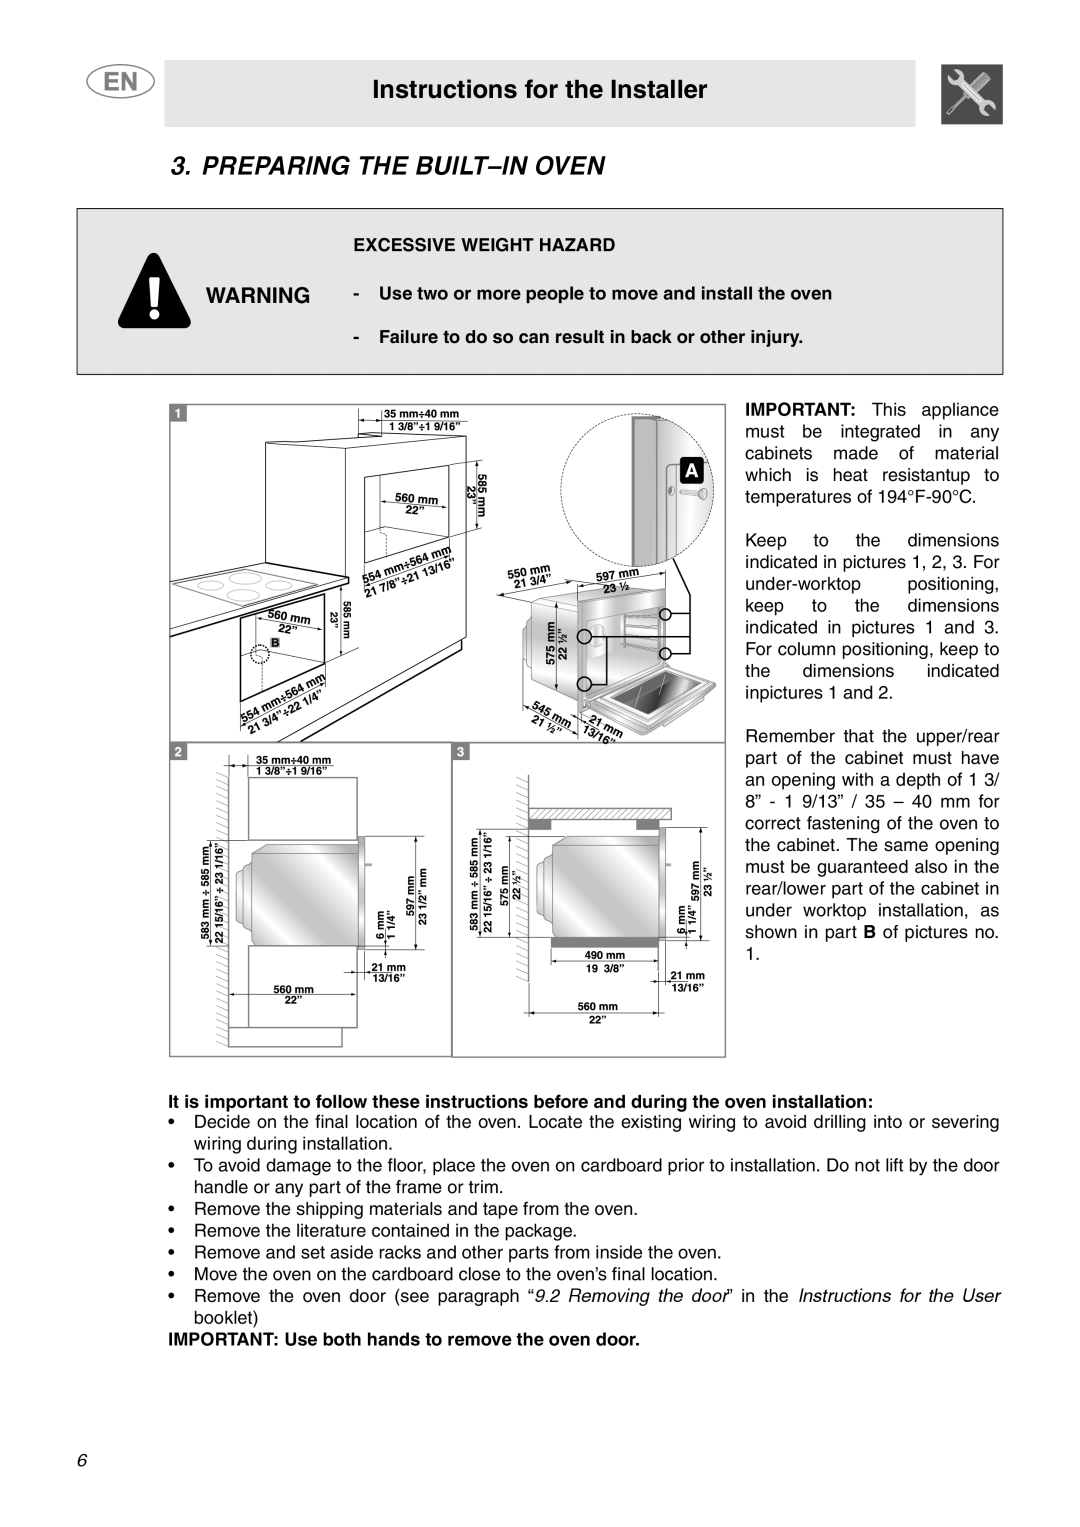 Smeg SCP160XU, SCP171XU important safety instructions Instructions for the Installer, Preparing The Built-Inoven 